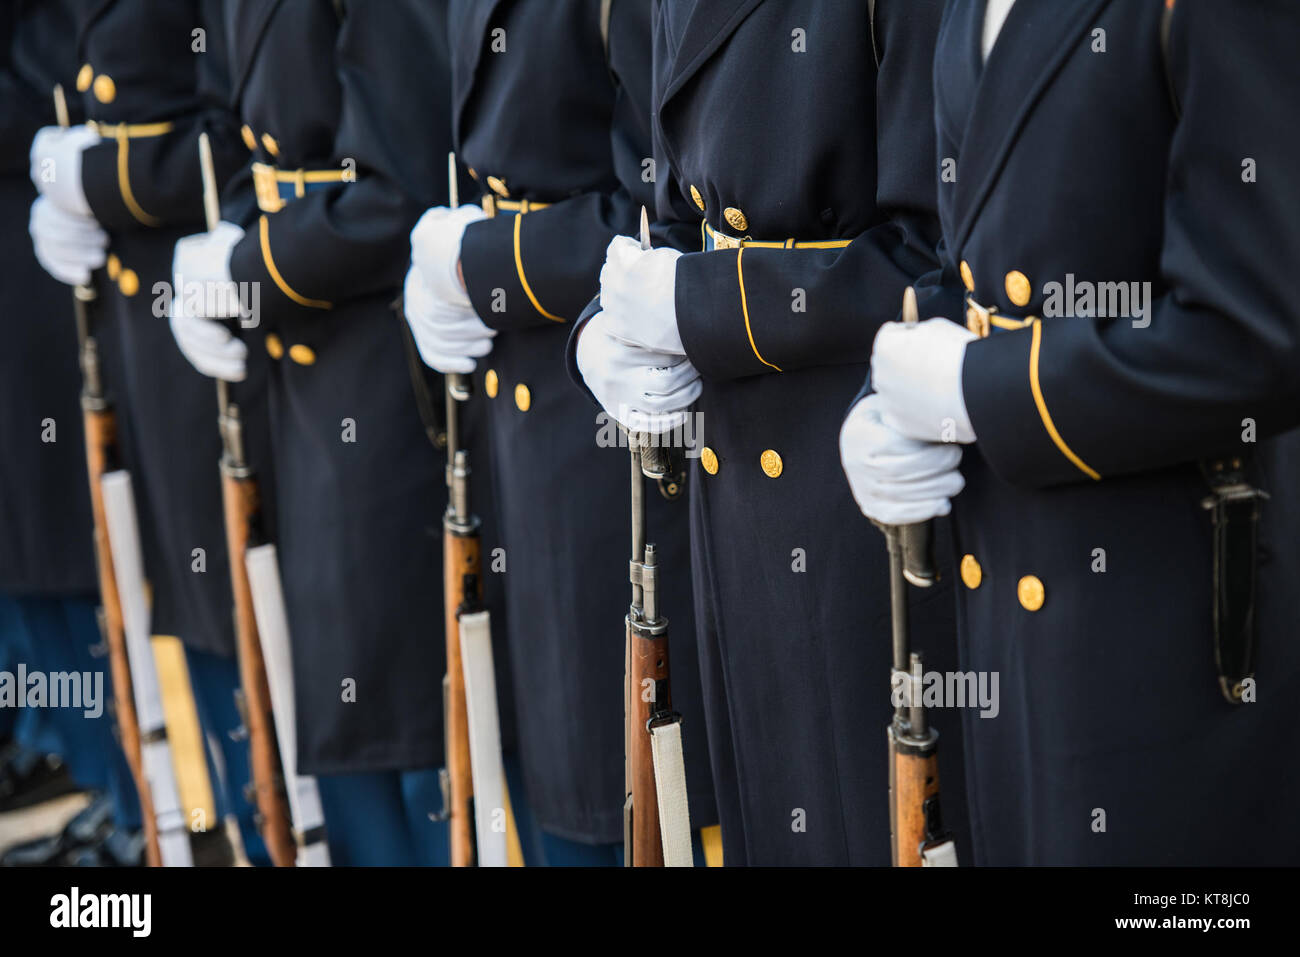 U.S. Army Honor Guard soldiers participate in an Army Full Honors Wreath-Laying Ceremony for the Army Arlington Ladies at the Tomb of the Unknown Soldier at Arlington National Cemetery, Arlington, Virginia, Nov. 15, 2017.  (U.S. Army photo by Elizabeth Fraser / Arlington National Cemetery / released) Stock Photo